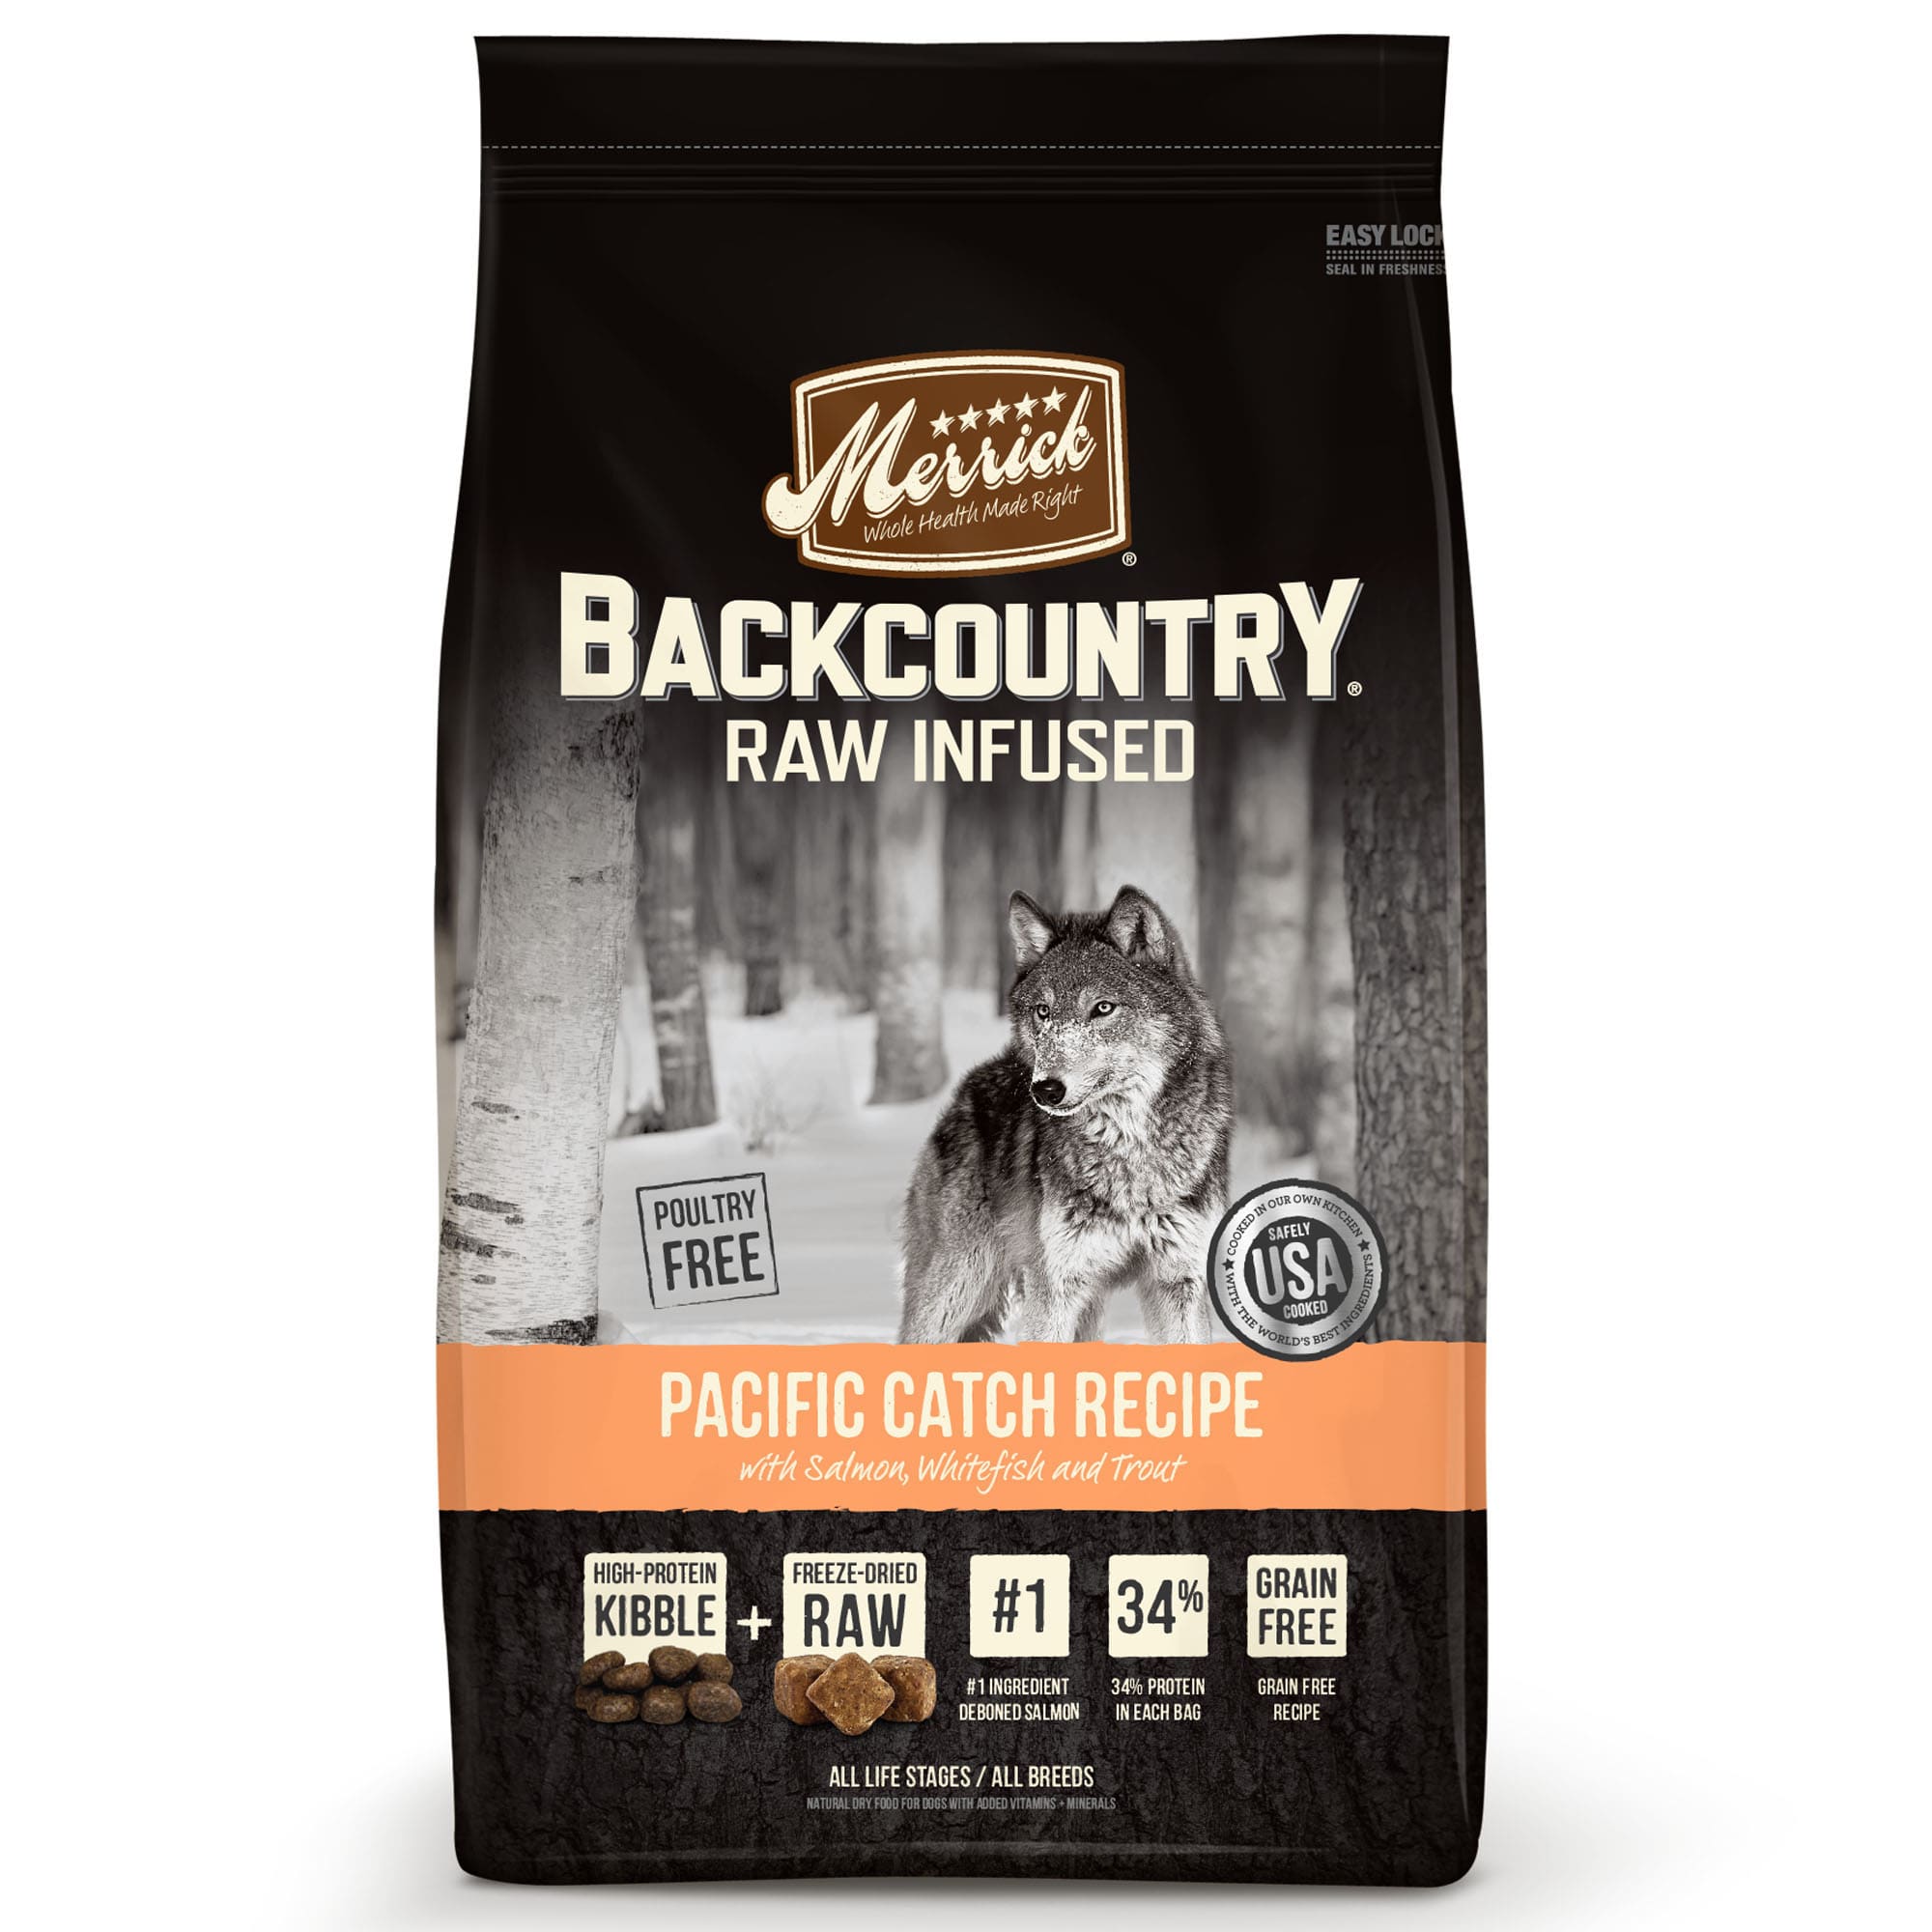 Merrick Backcountry Grain Free Raw Infused Pacific Catch Dry Dog Food